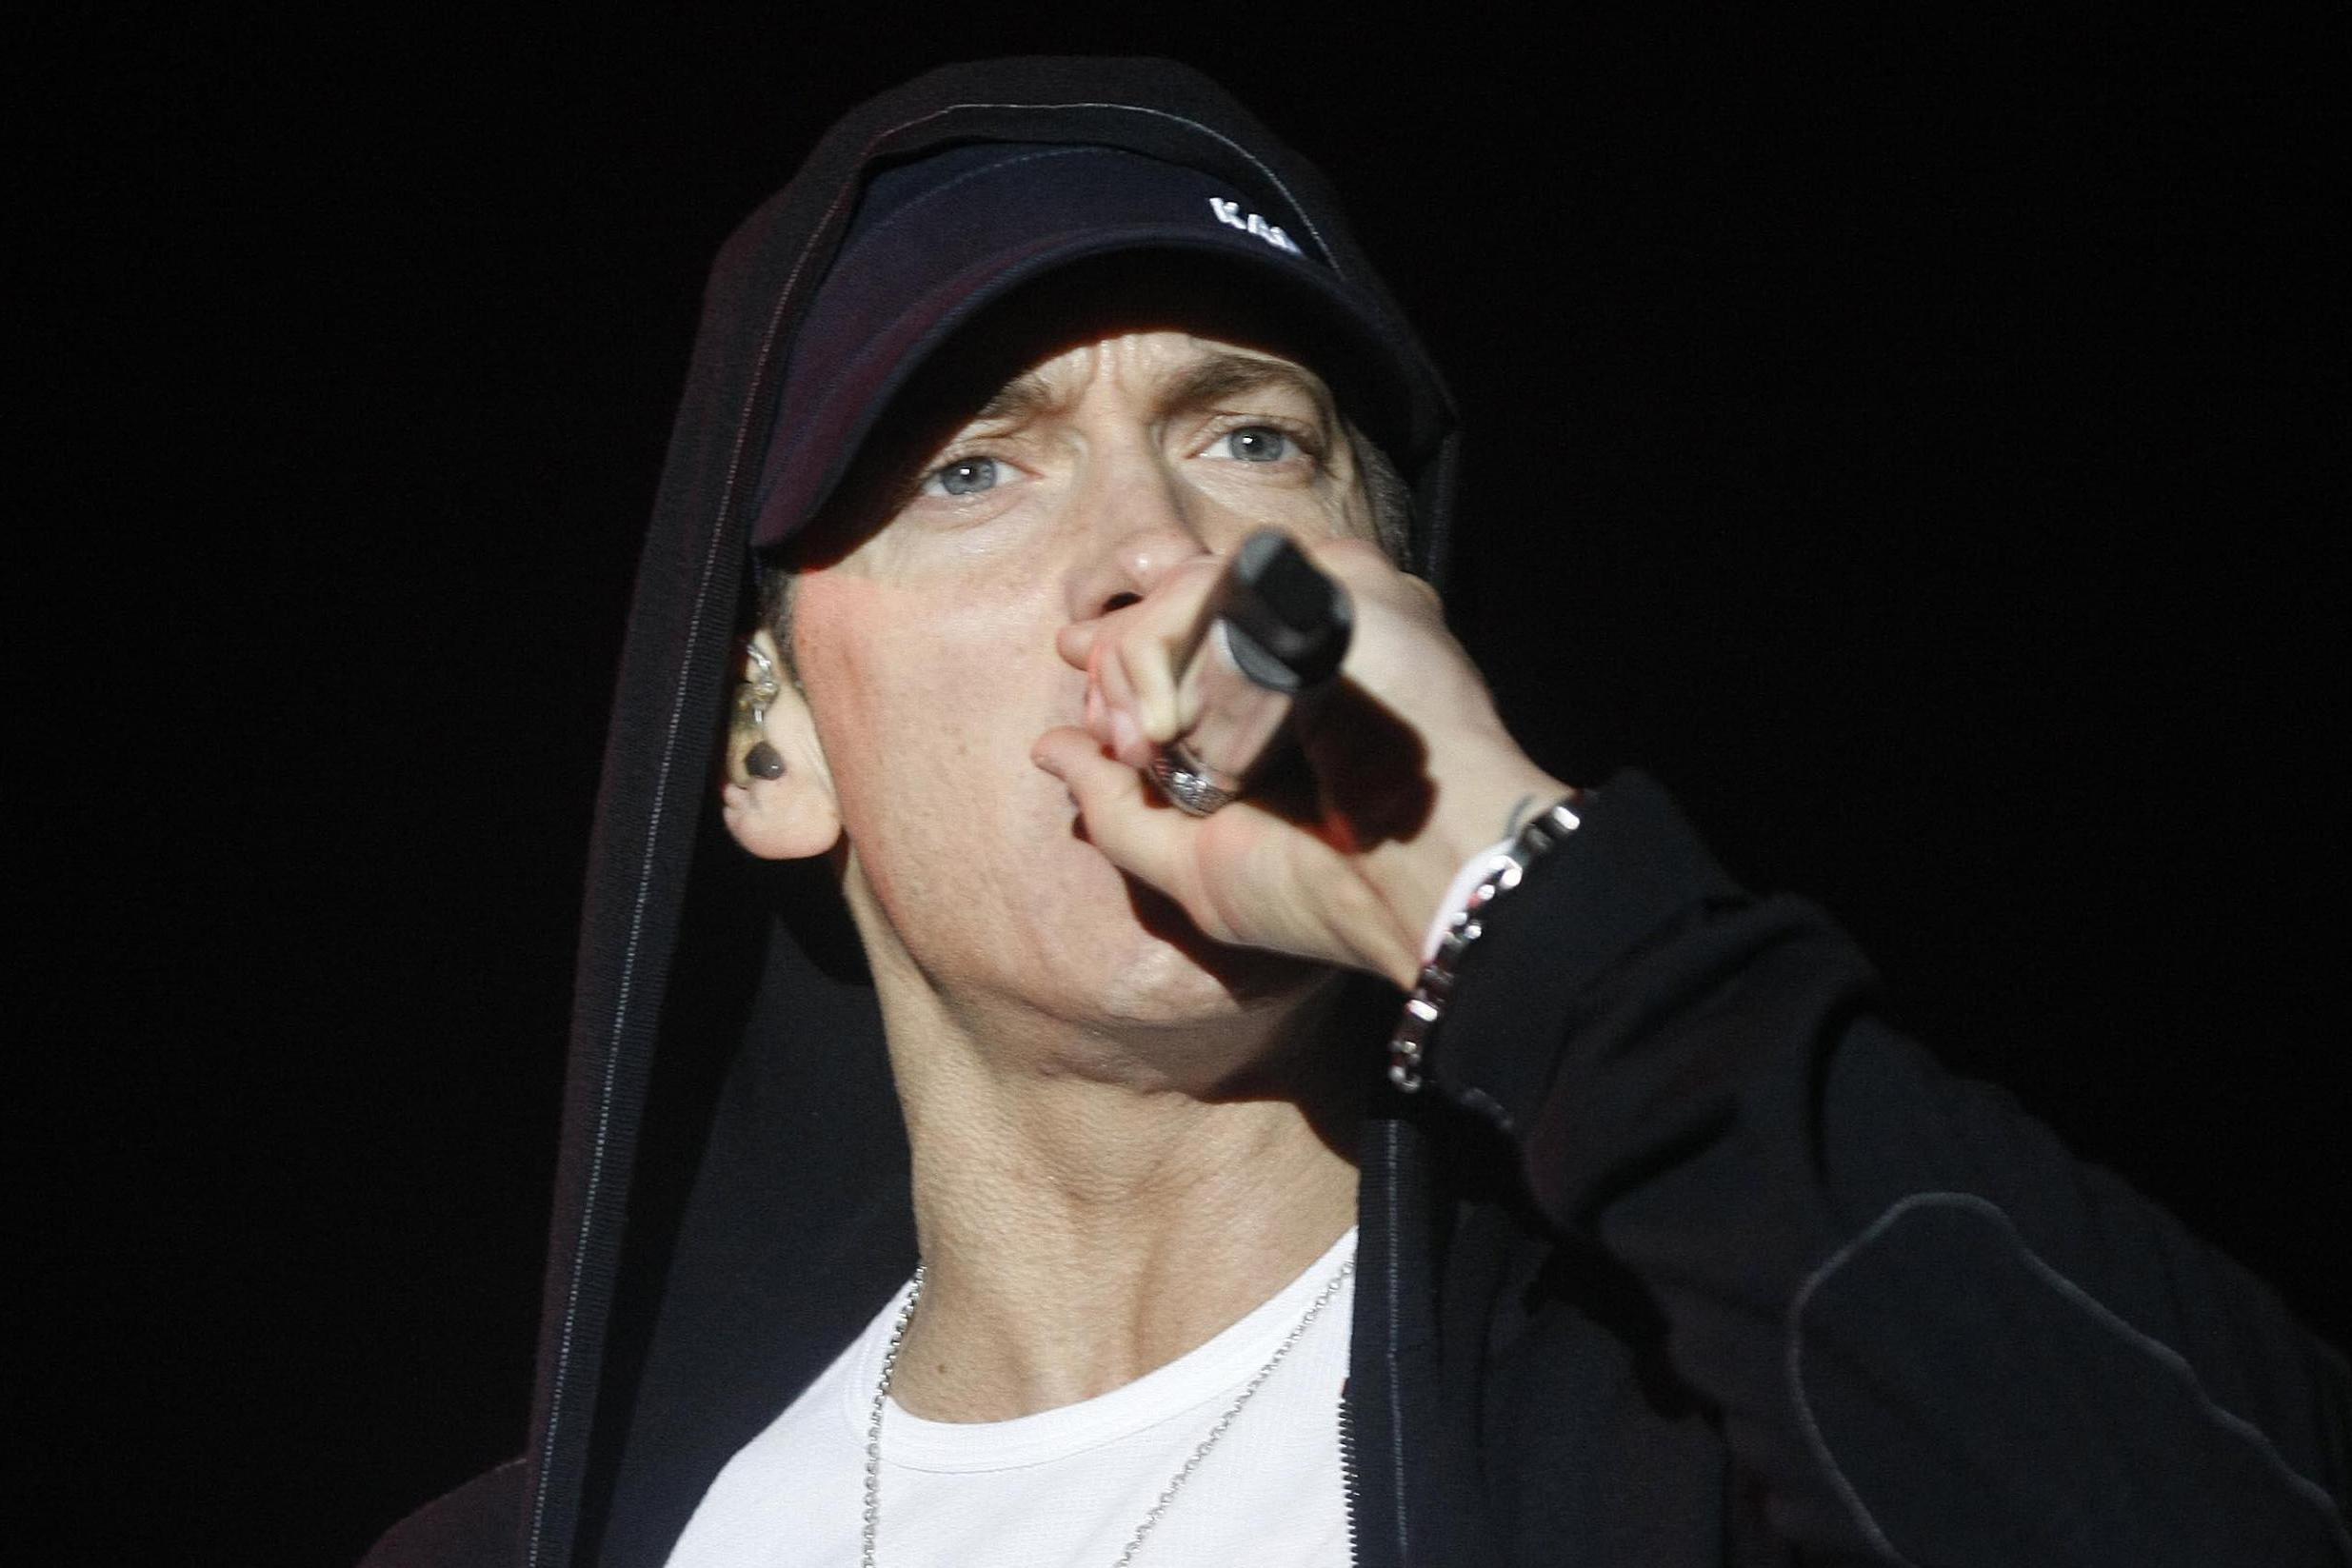 Eminem breaks own chart record amid controversy over